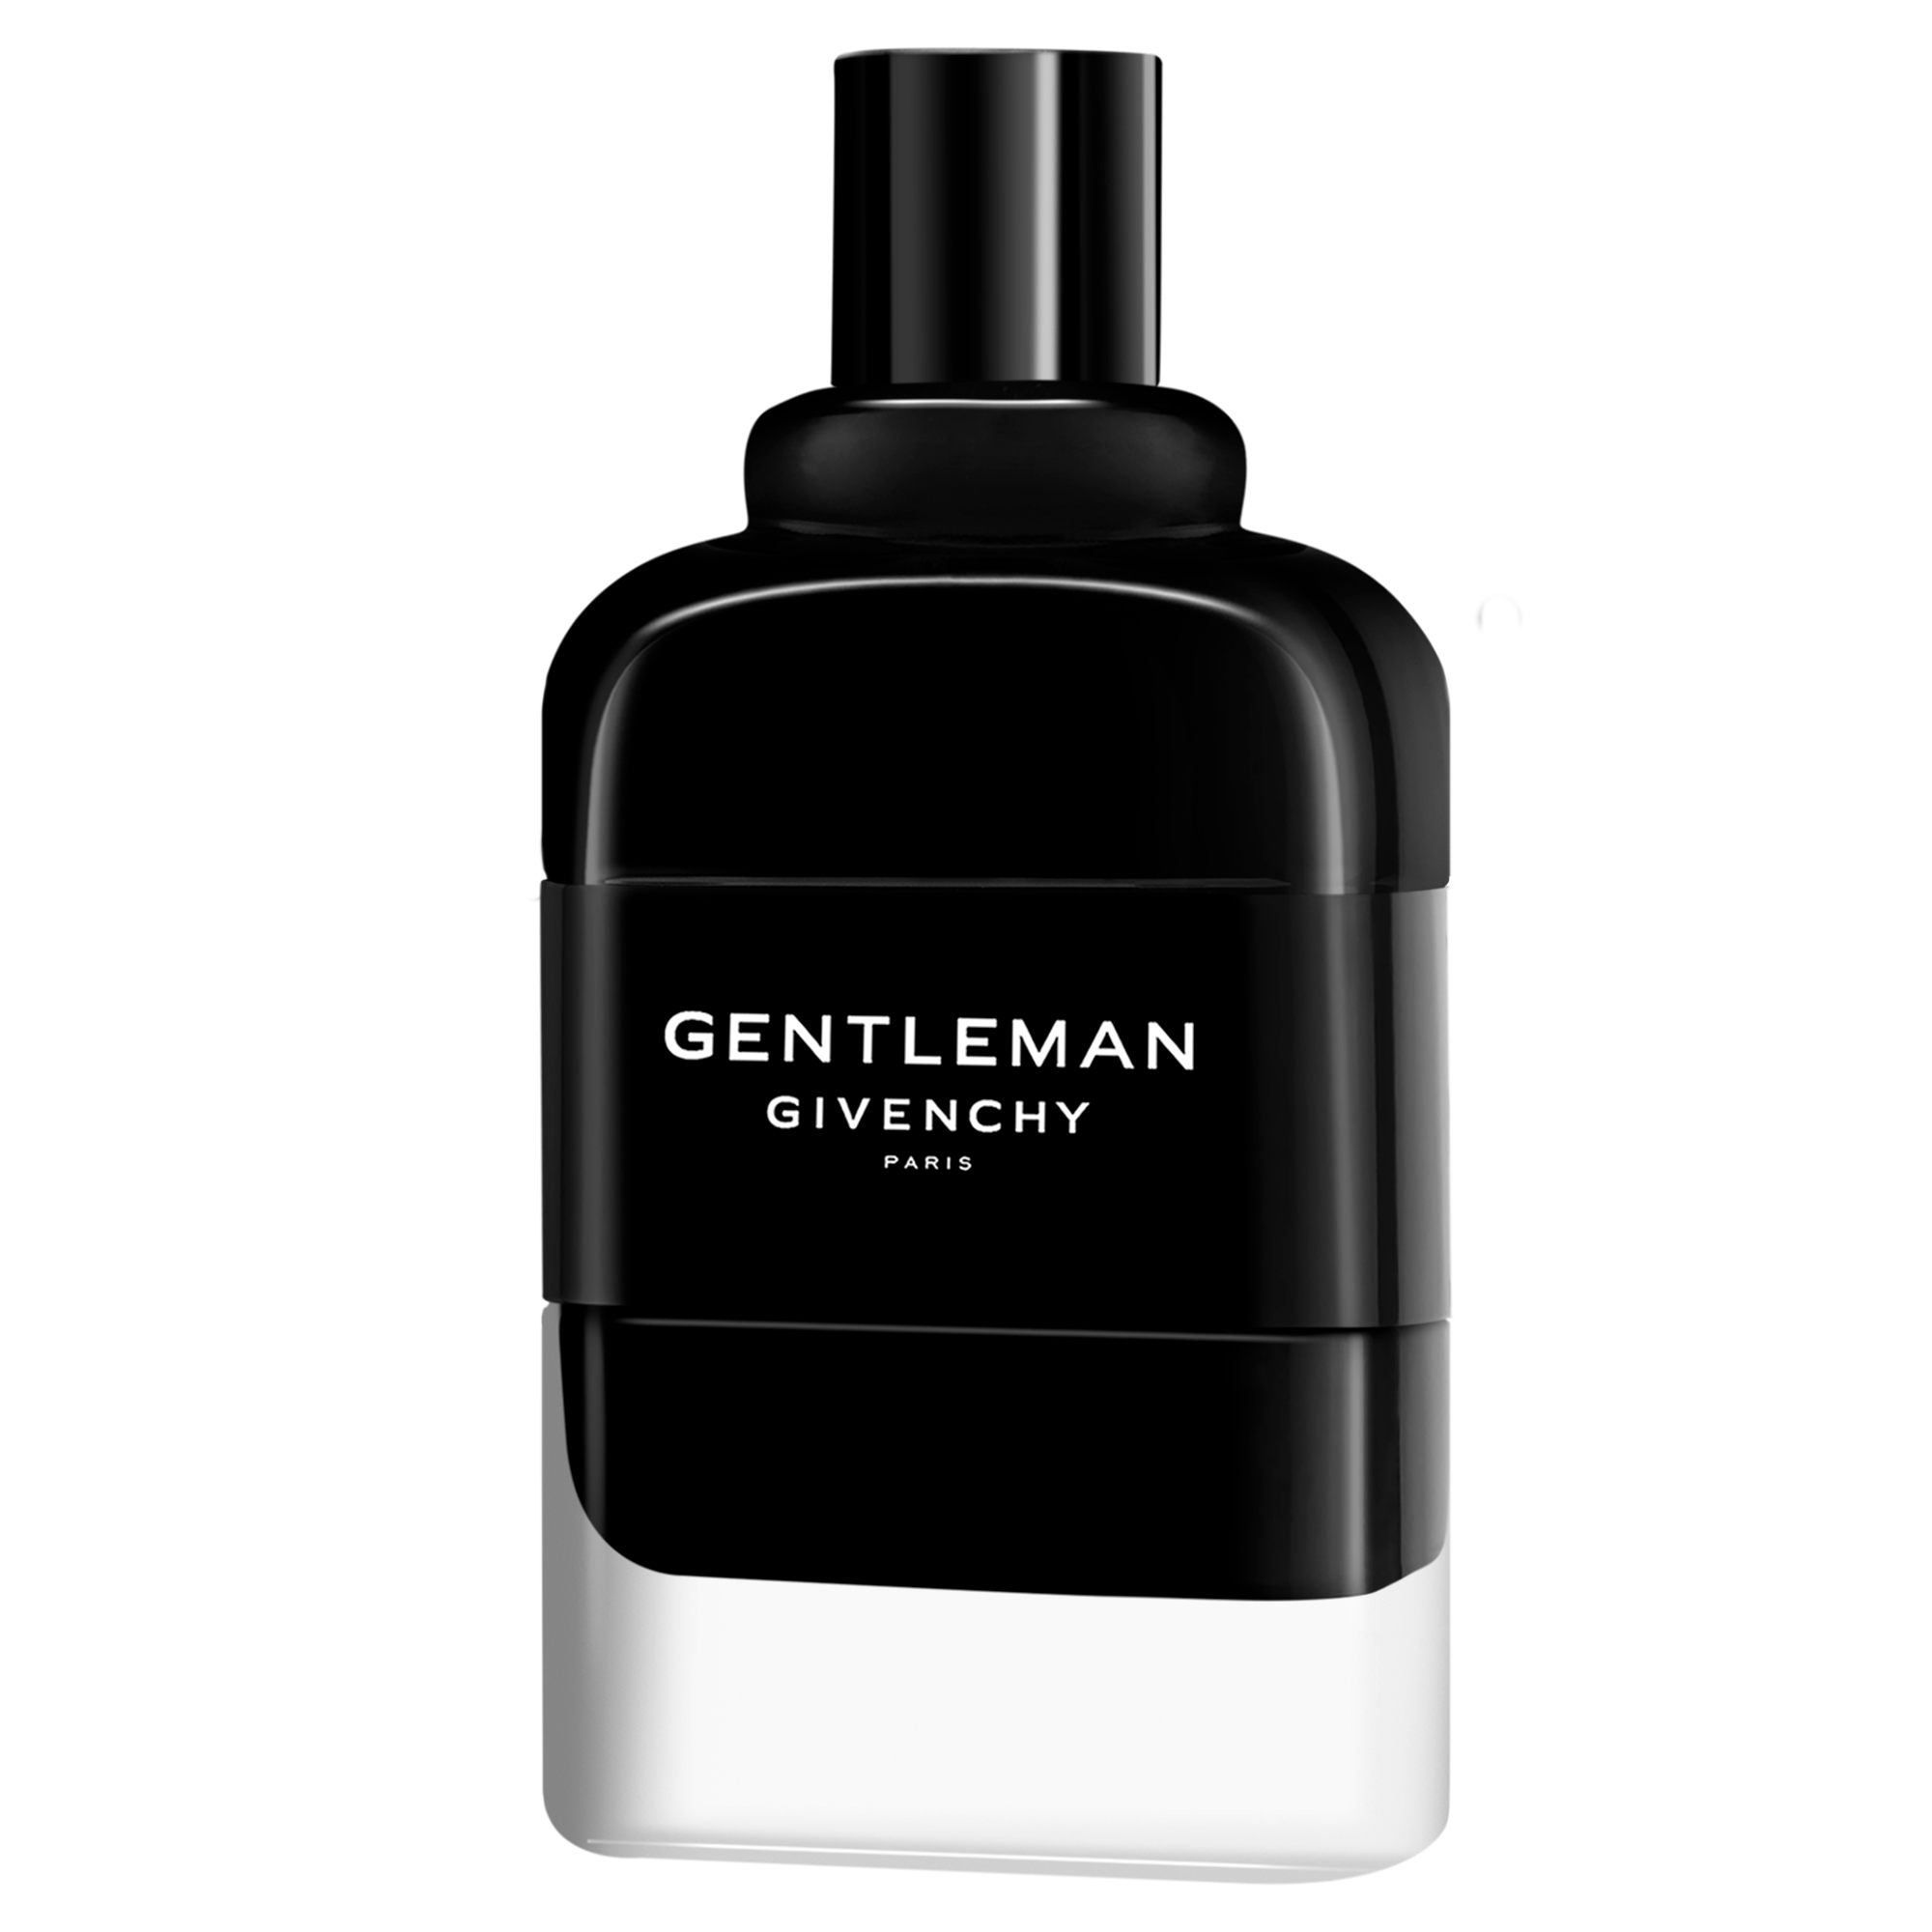 Gentleman Givenchy ∷ GIVENCHY